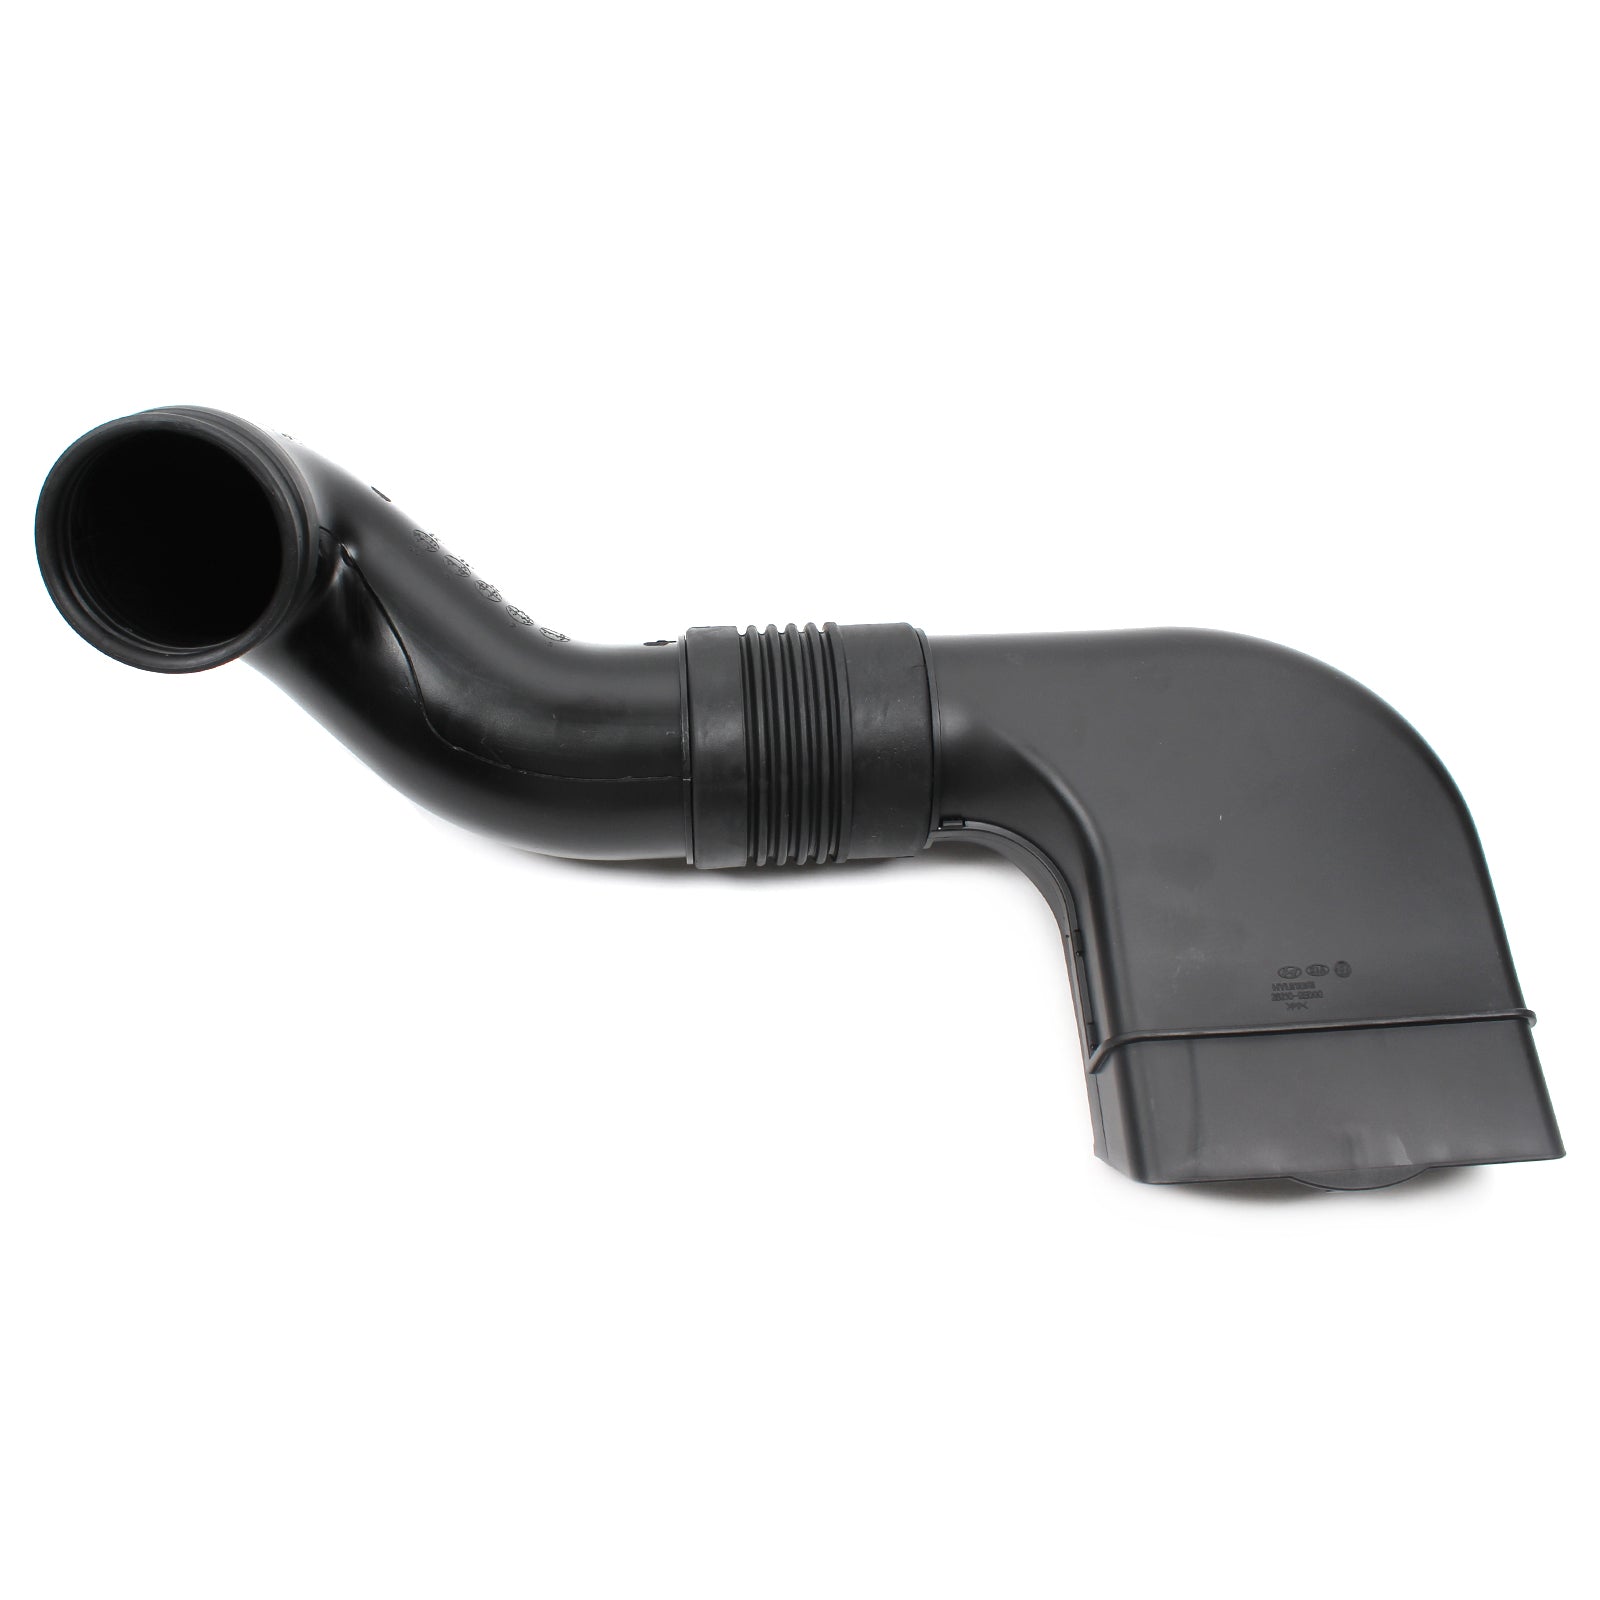 GENUINE Air Cleaner Intake Duct Hose for 2005-10 Tucson Sportage 282102E100